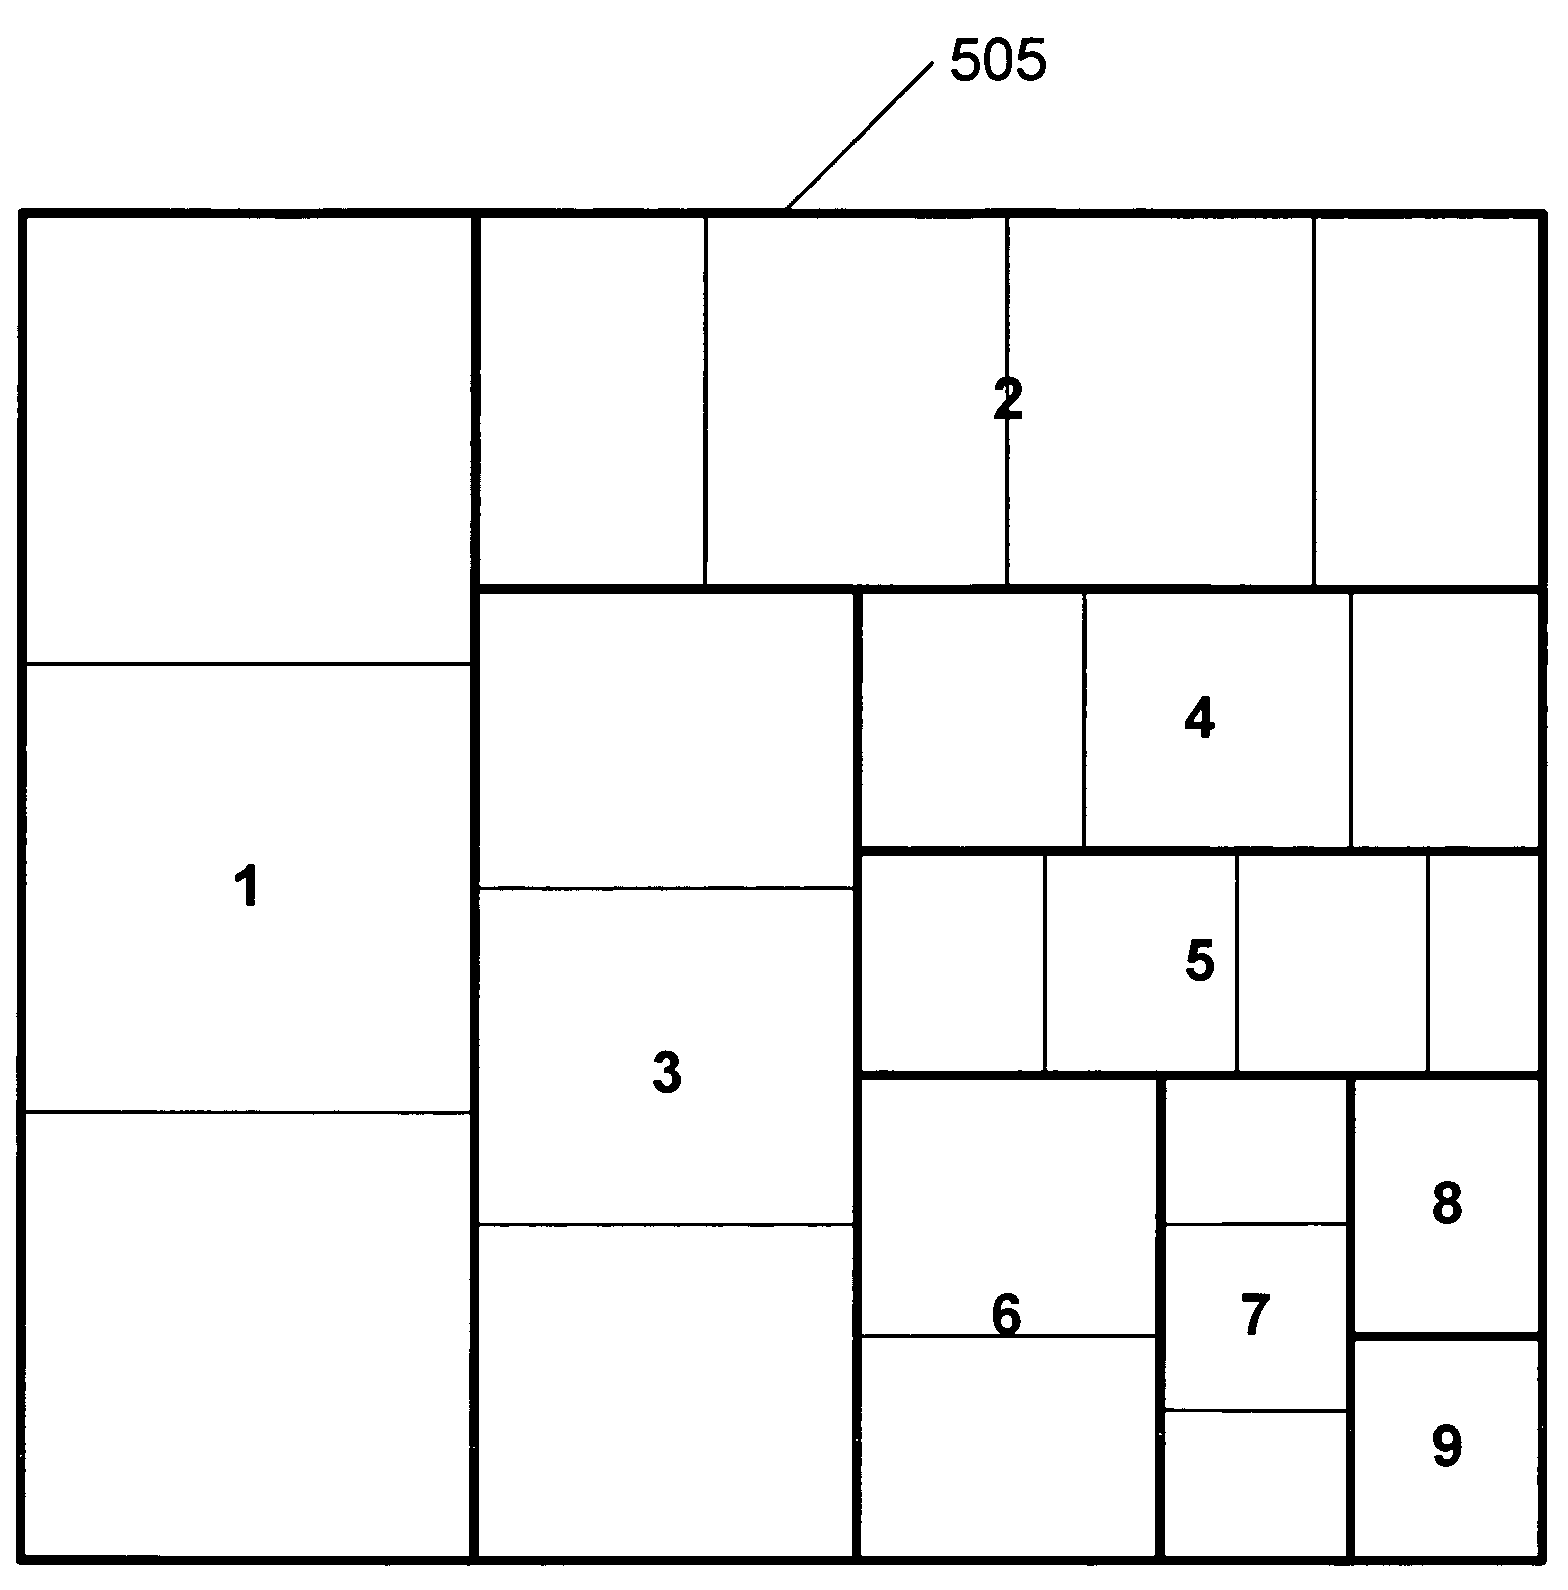 Treemap display with minimum cell size